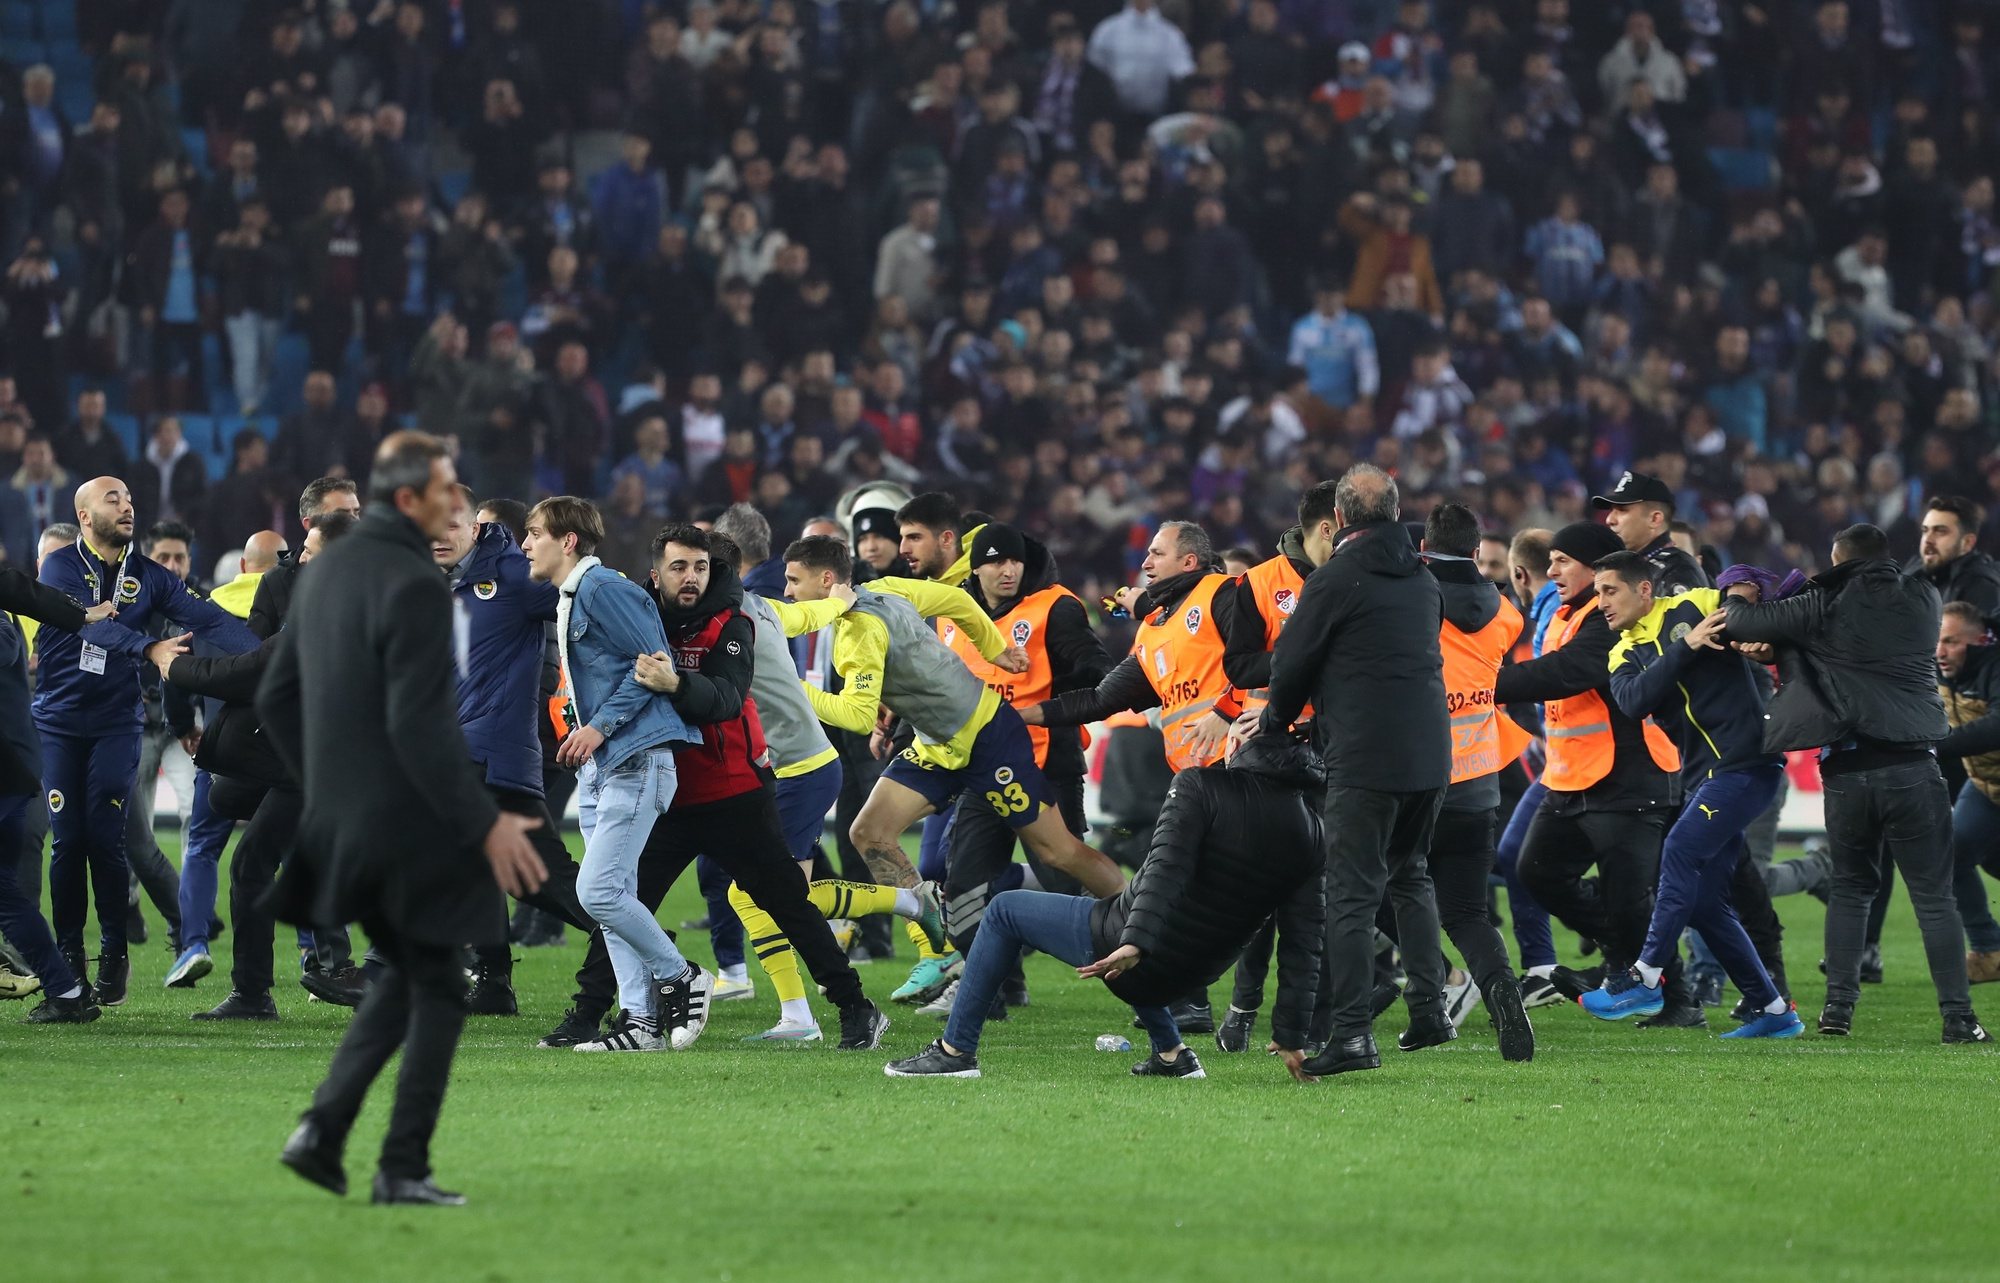 epa11226900 Trabzonspor fans attack Fenerbahce players after the Super League match between Trabzonspor and Fenerbahce in Trabzon, Turkey, 17 March 2024. After Fenerbahce won the match 3-2 against Trabzonspor fans entered the field and began chasing away Fenerbahce players.  EPA/STR